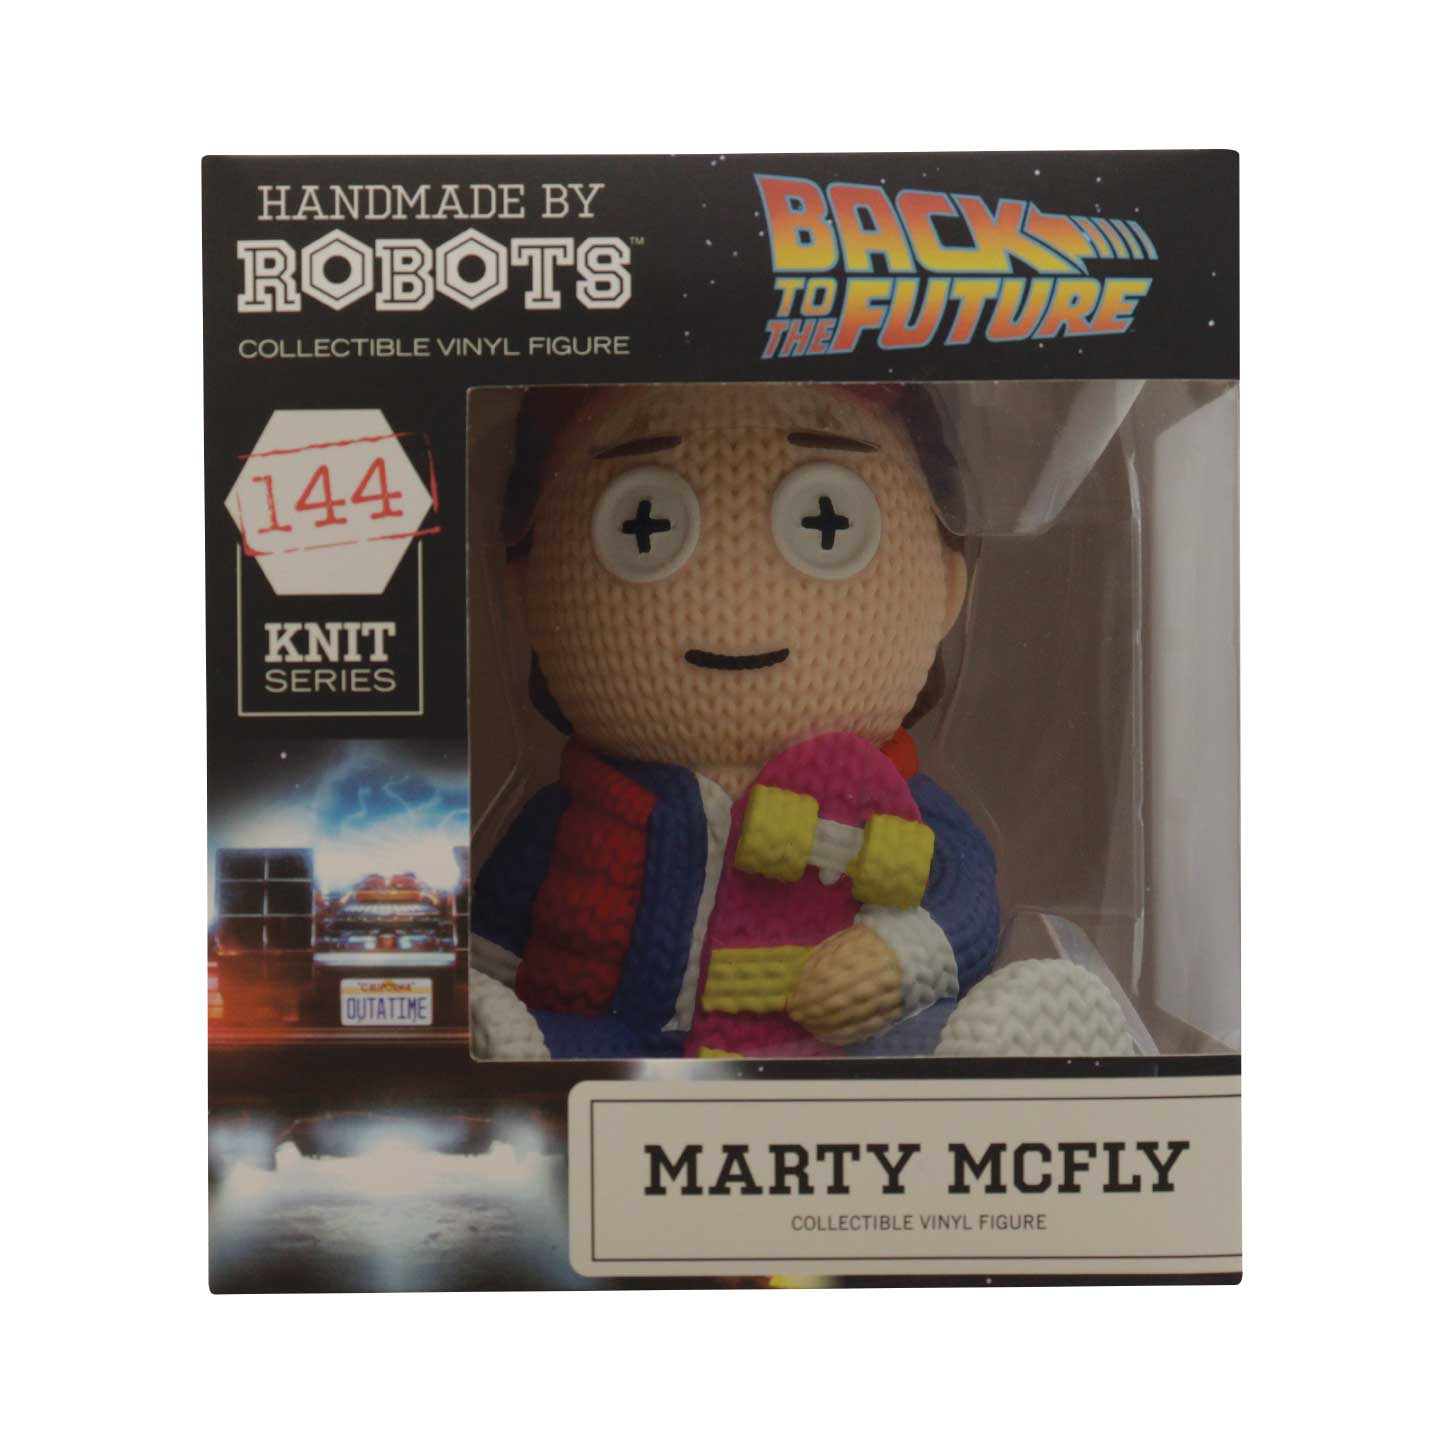 Back to the Future - Marty McFly Collectible Vinyl Figure from Handmade by Robots